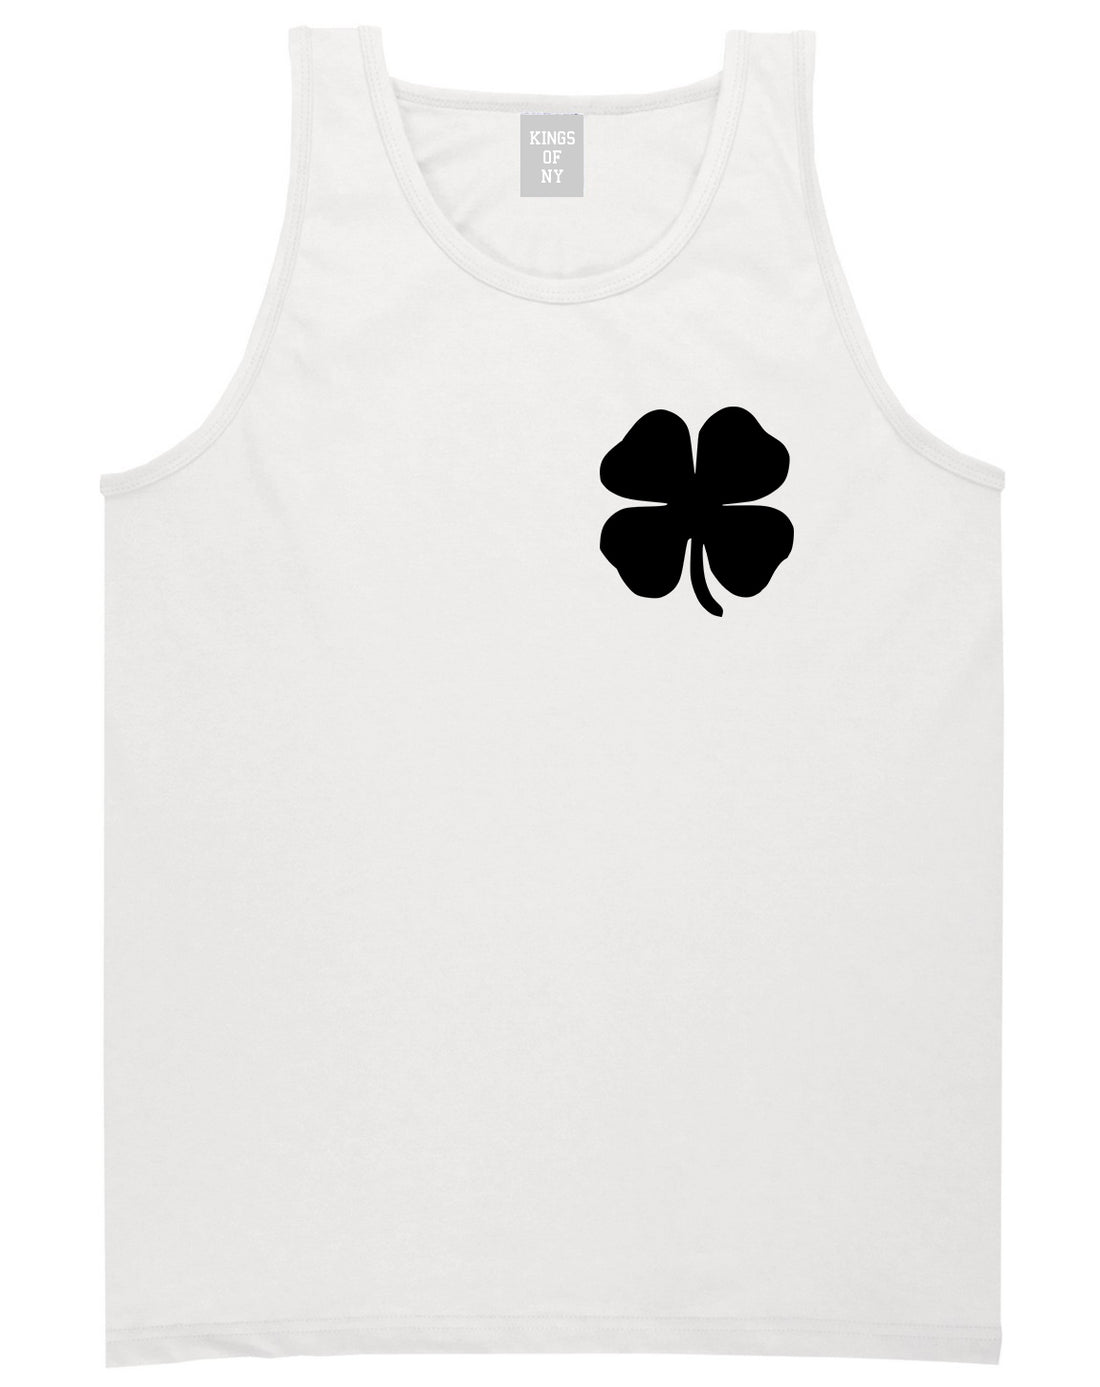 Four Leaf Clover Chest White Tank Top Shirt by Kings Of NY